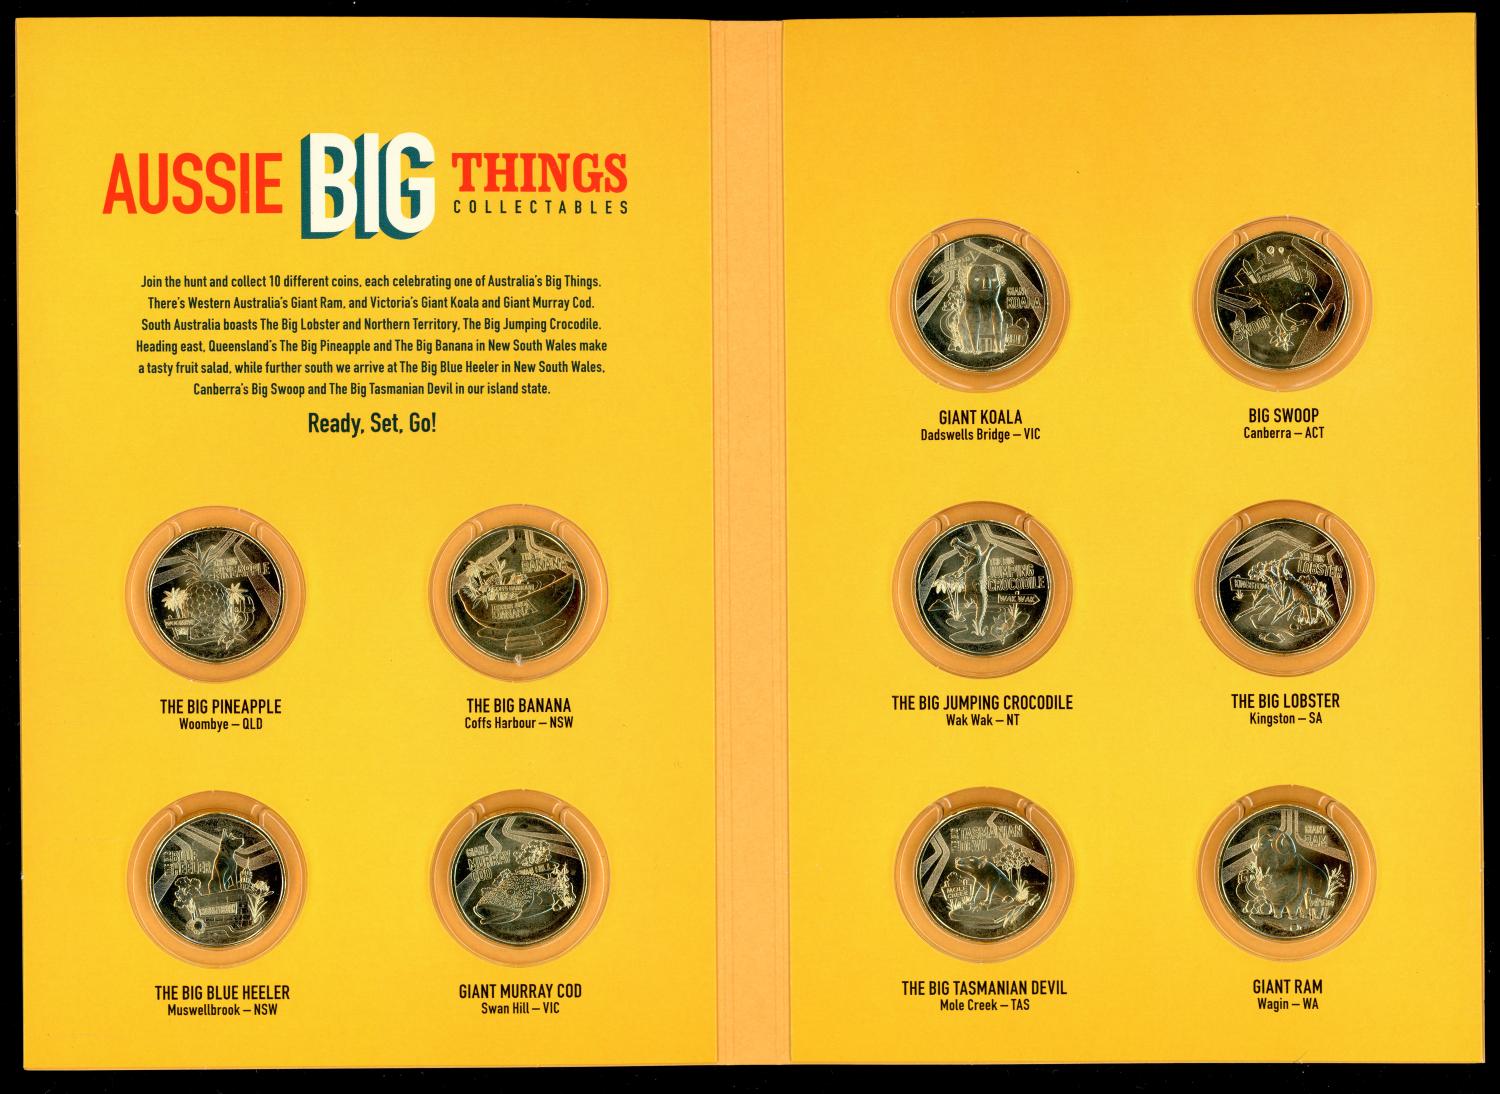 Thumbnail for 2023 $1 Aussie Big Things Collectable Folder with 10 Coins in Place in Album